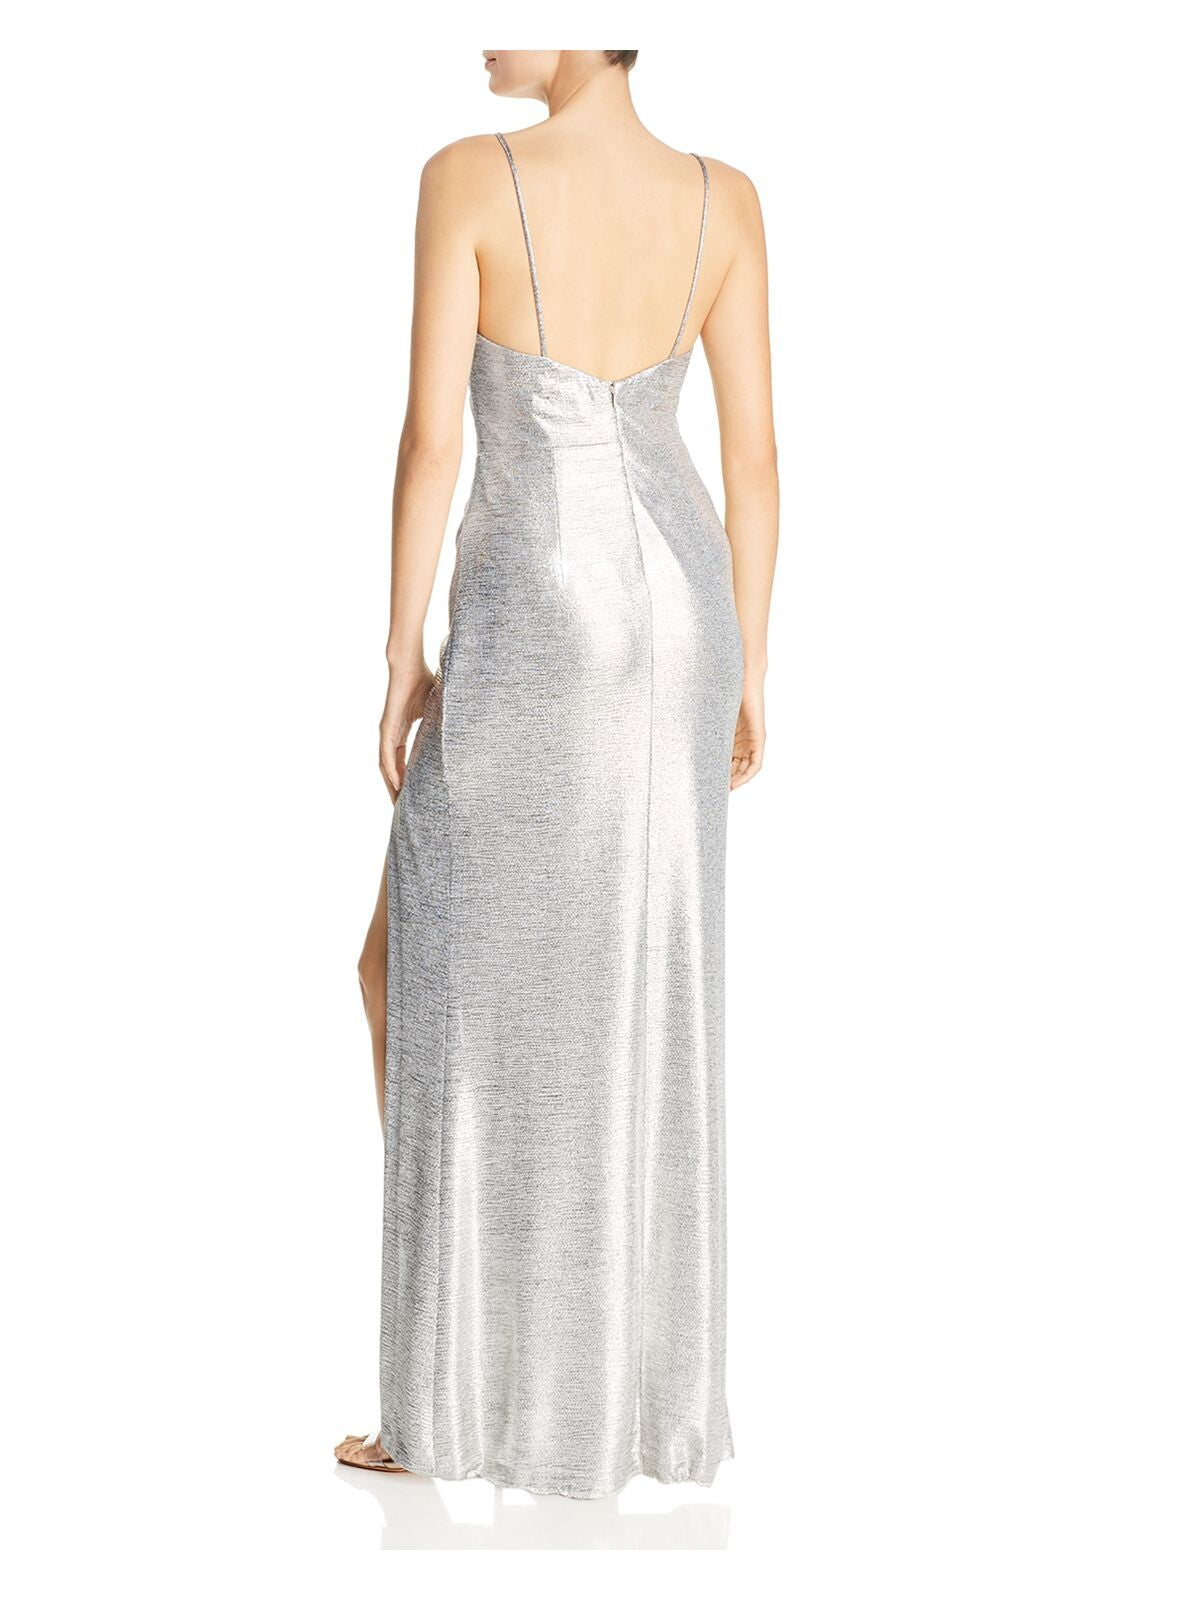 AVERY G Womens Silver Ruched Spaghetti Strap Square Neck Full-Length Evening Sheath Dress 8